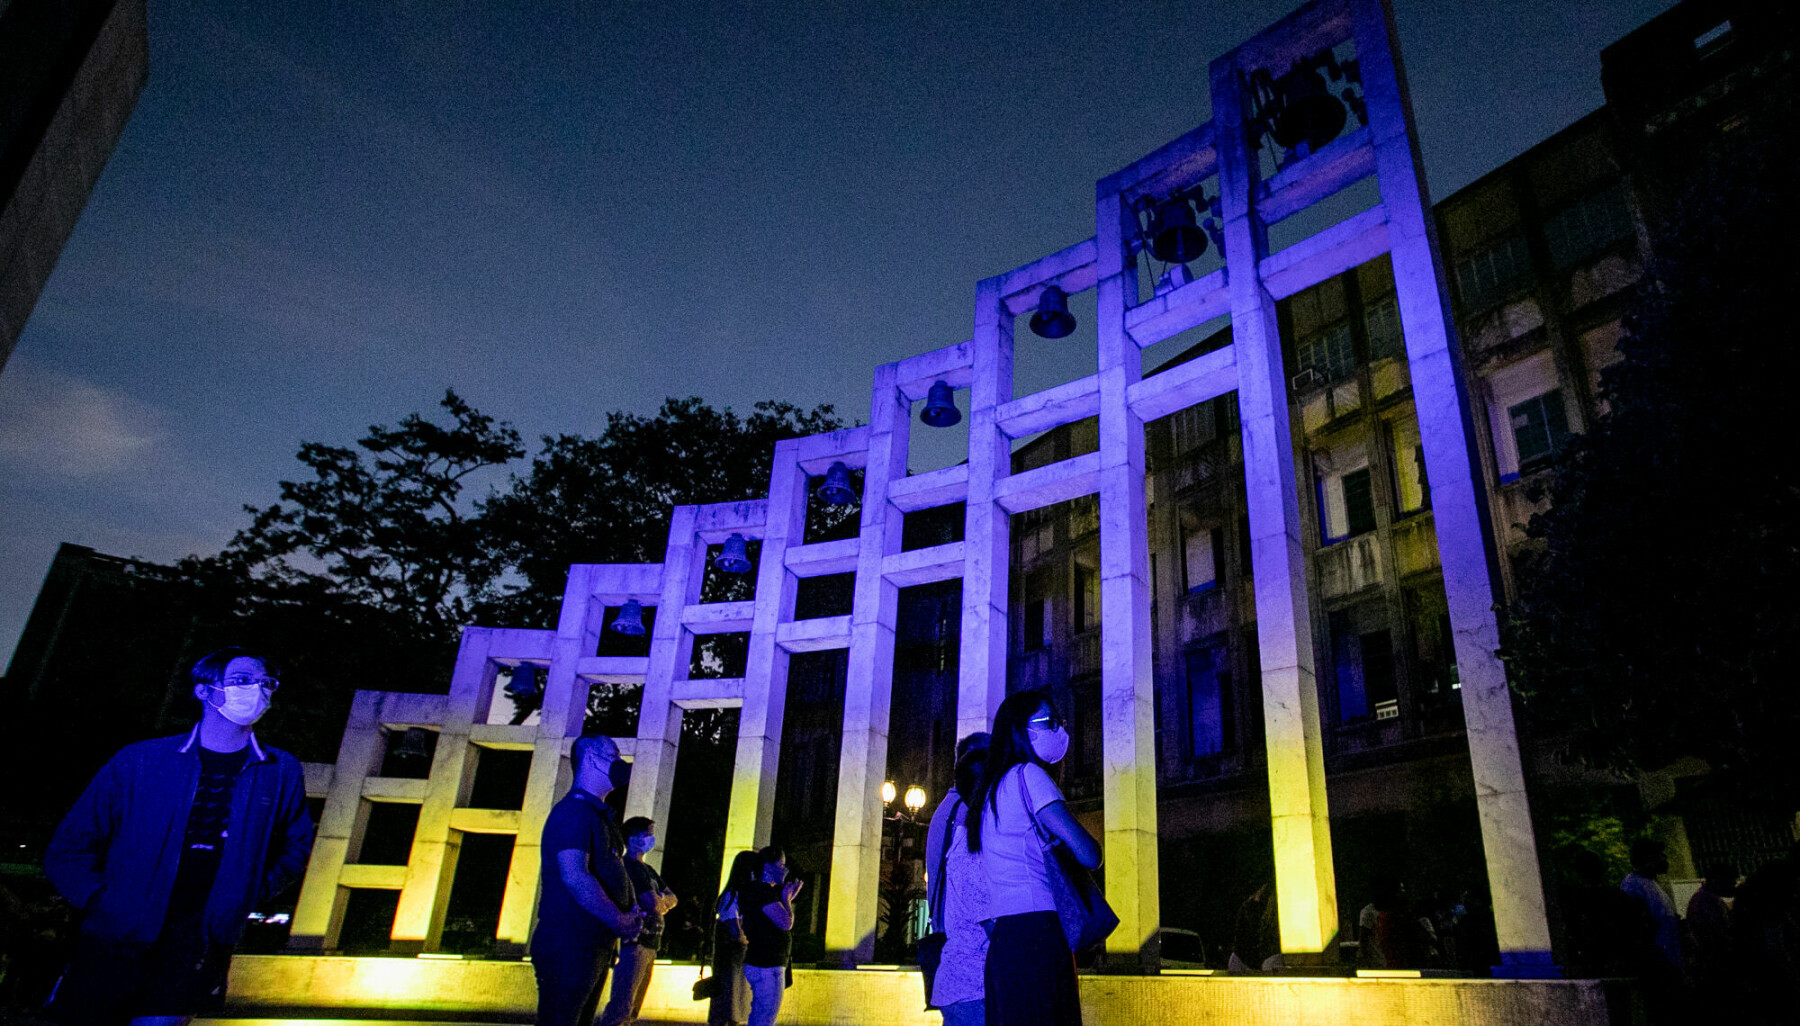 March 2, 2022, Manila, Philippines: People walk past the Santisimo Rosario Parish where the flag of Ukraine is projected as a show of support for the country at the University of Santo Tomas in Manila, Philippines. March 2, 2022. Other countries in Southeast Asia like Singapore and Indonesia have condemned Russiaâ€™s invasion of Ukraine, while the Philippines has called for a peaceful resolution on the conflict and have expressed concerns over the safety of Filipinos fleeing from the war-stricken eastern European country.